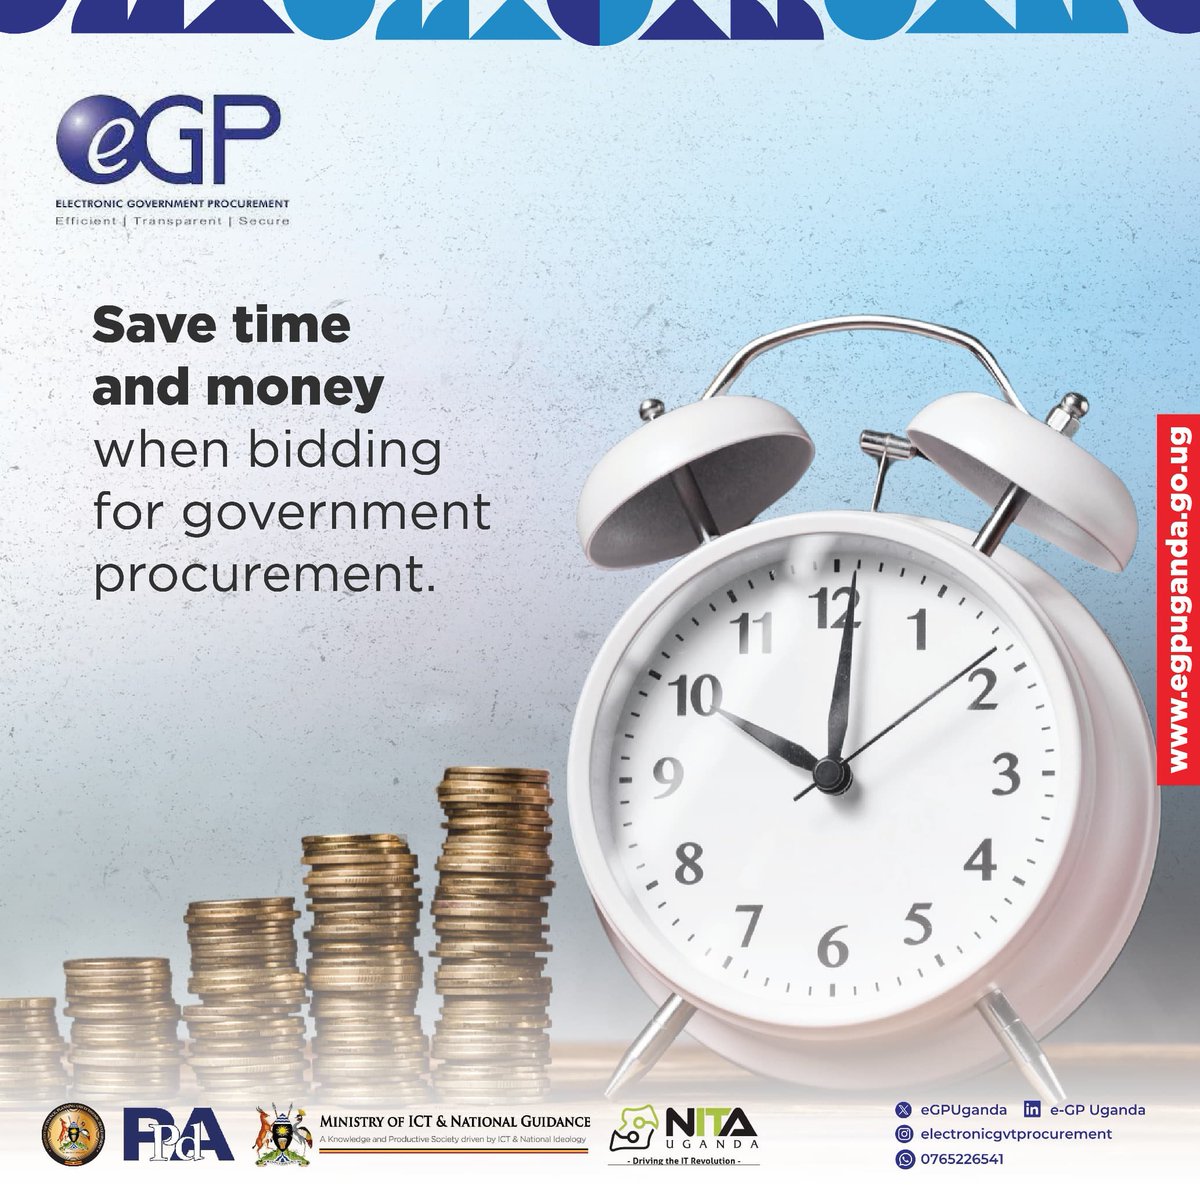 Efficiently cut costs and time in government procurement bids. #ProcurementThatWorks